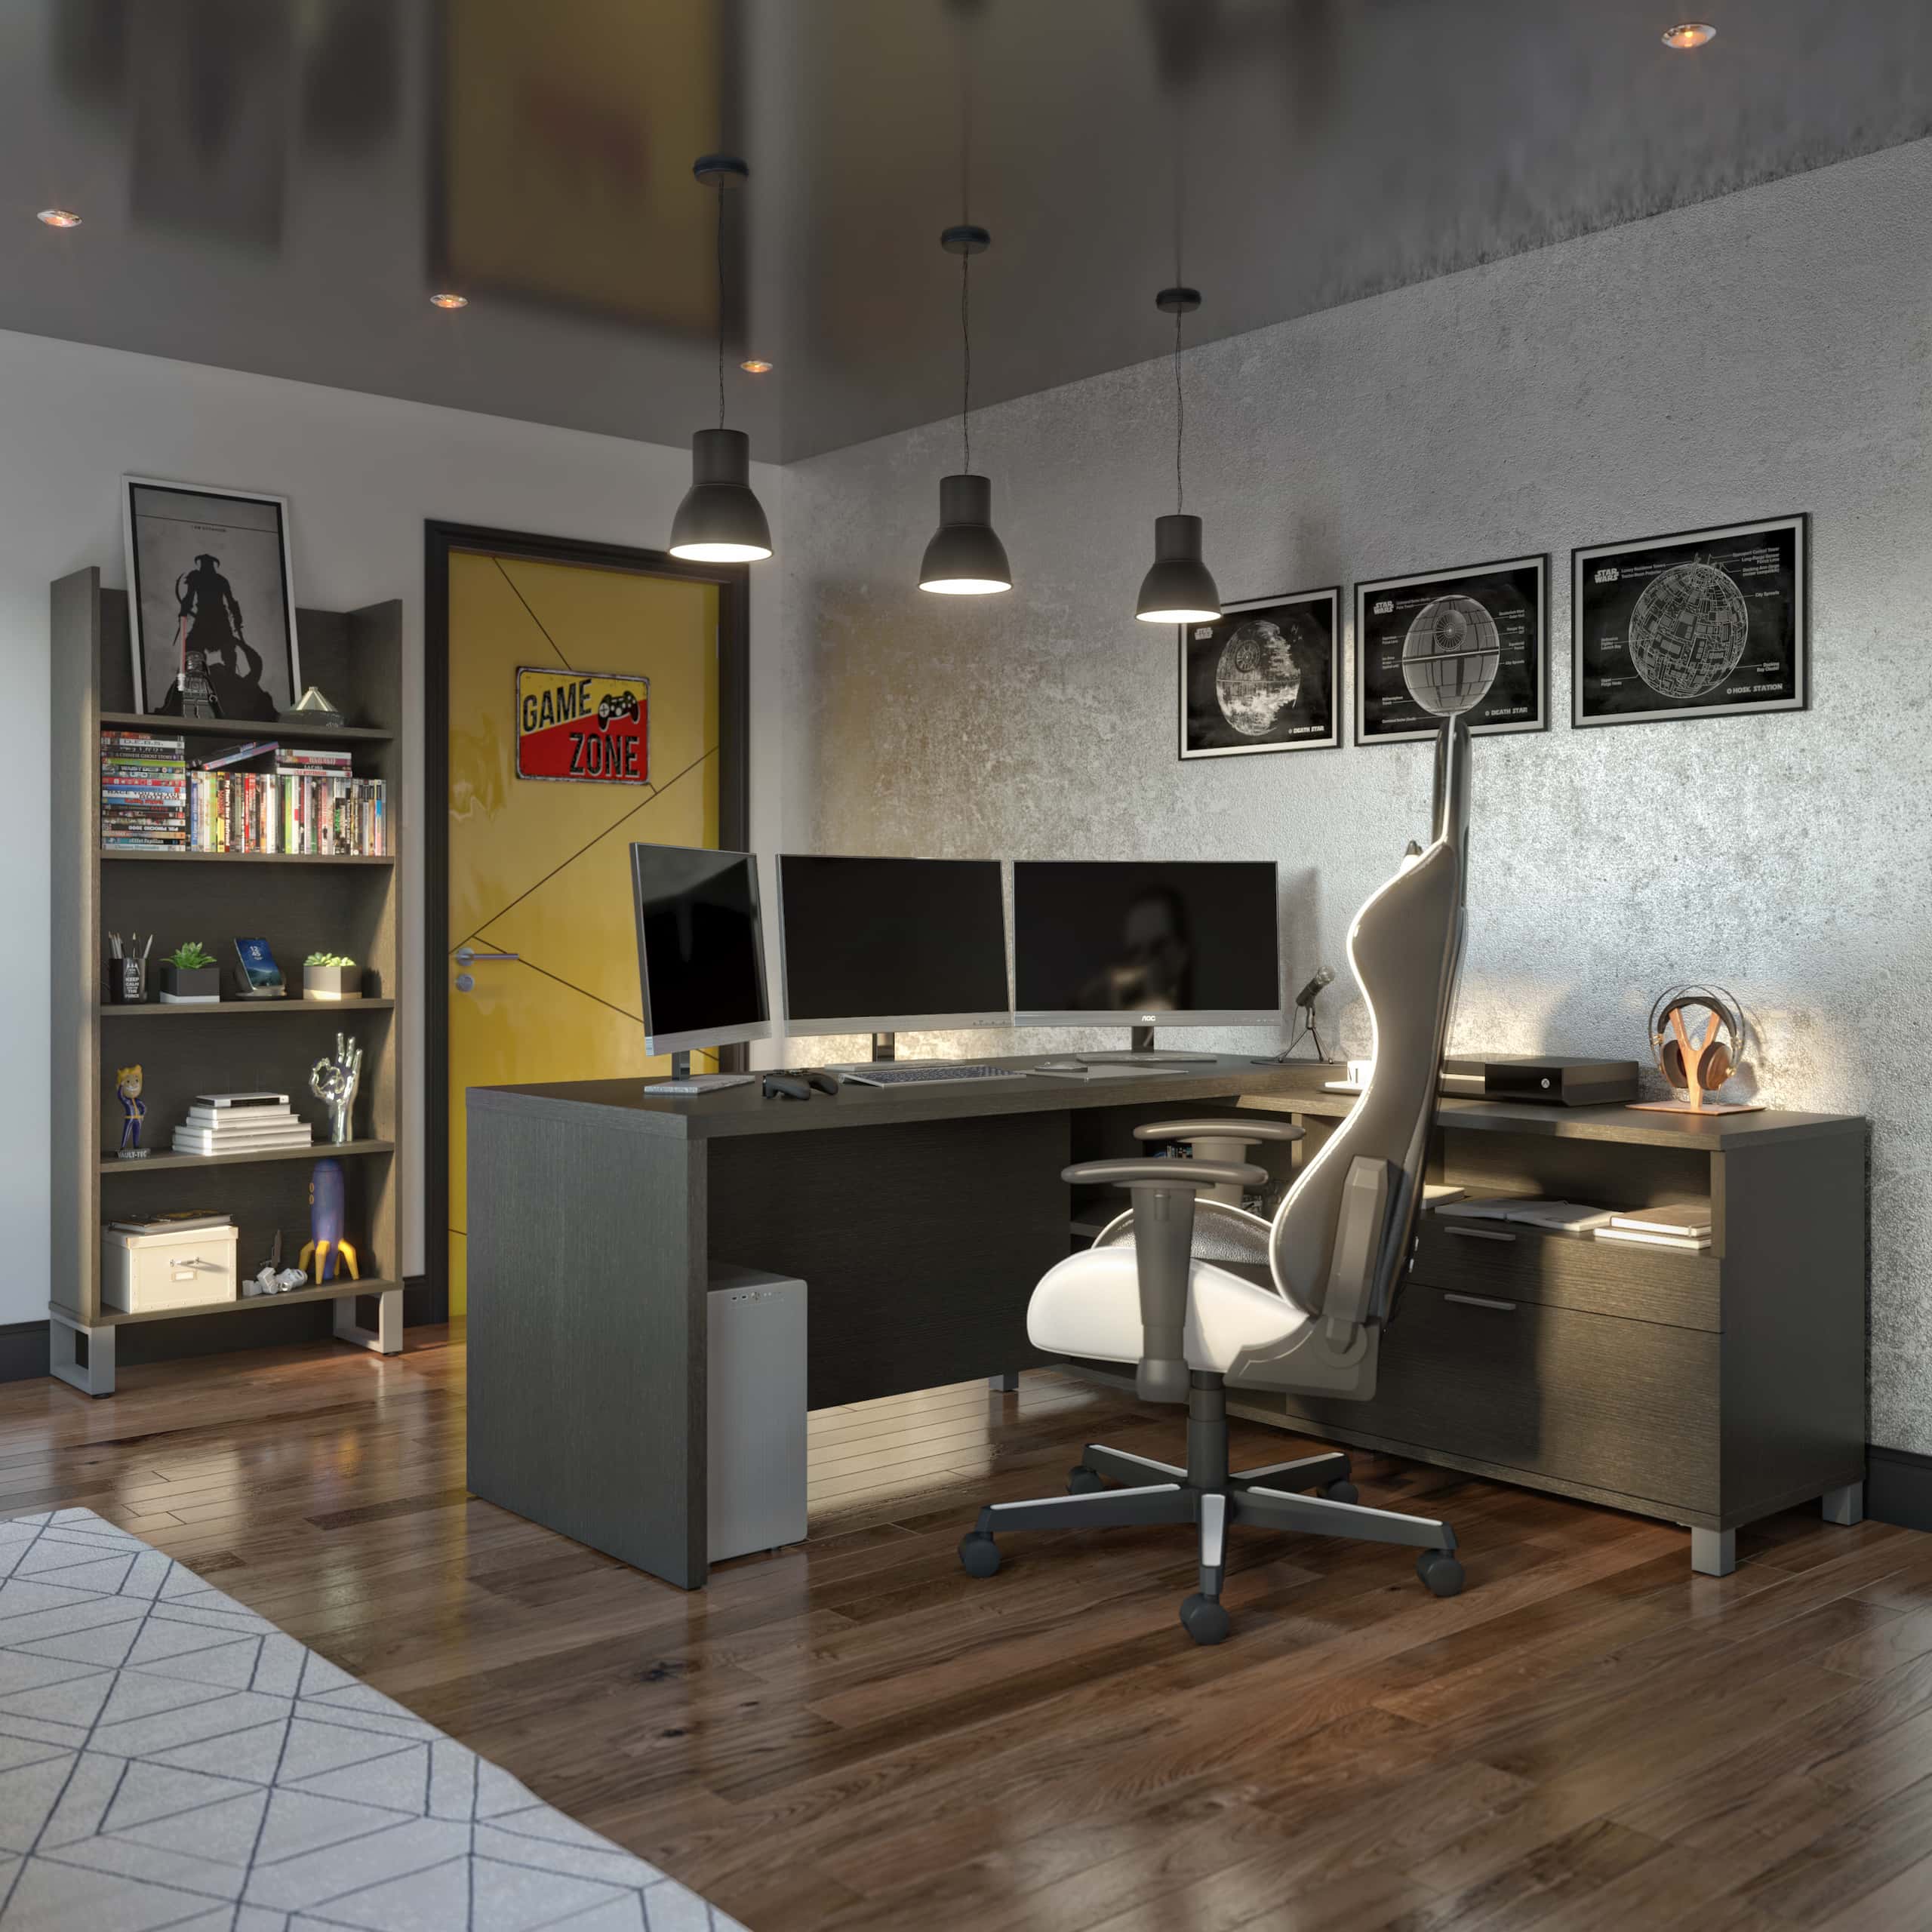 4 Tips for Finding a Gaming Desk for Work & Play